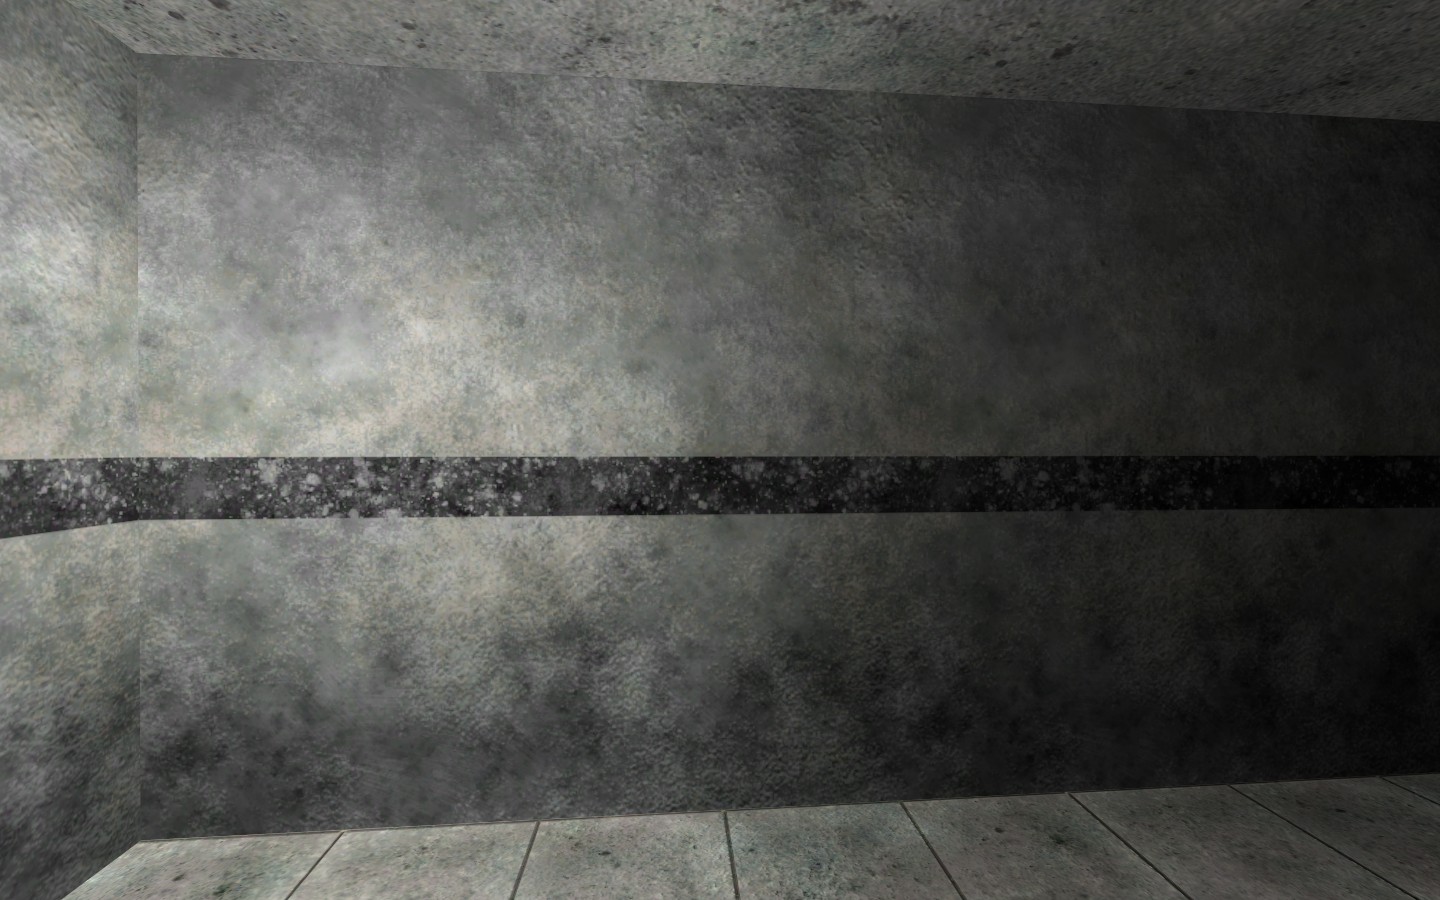 My first ever procedural textures, created in 2009.